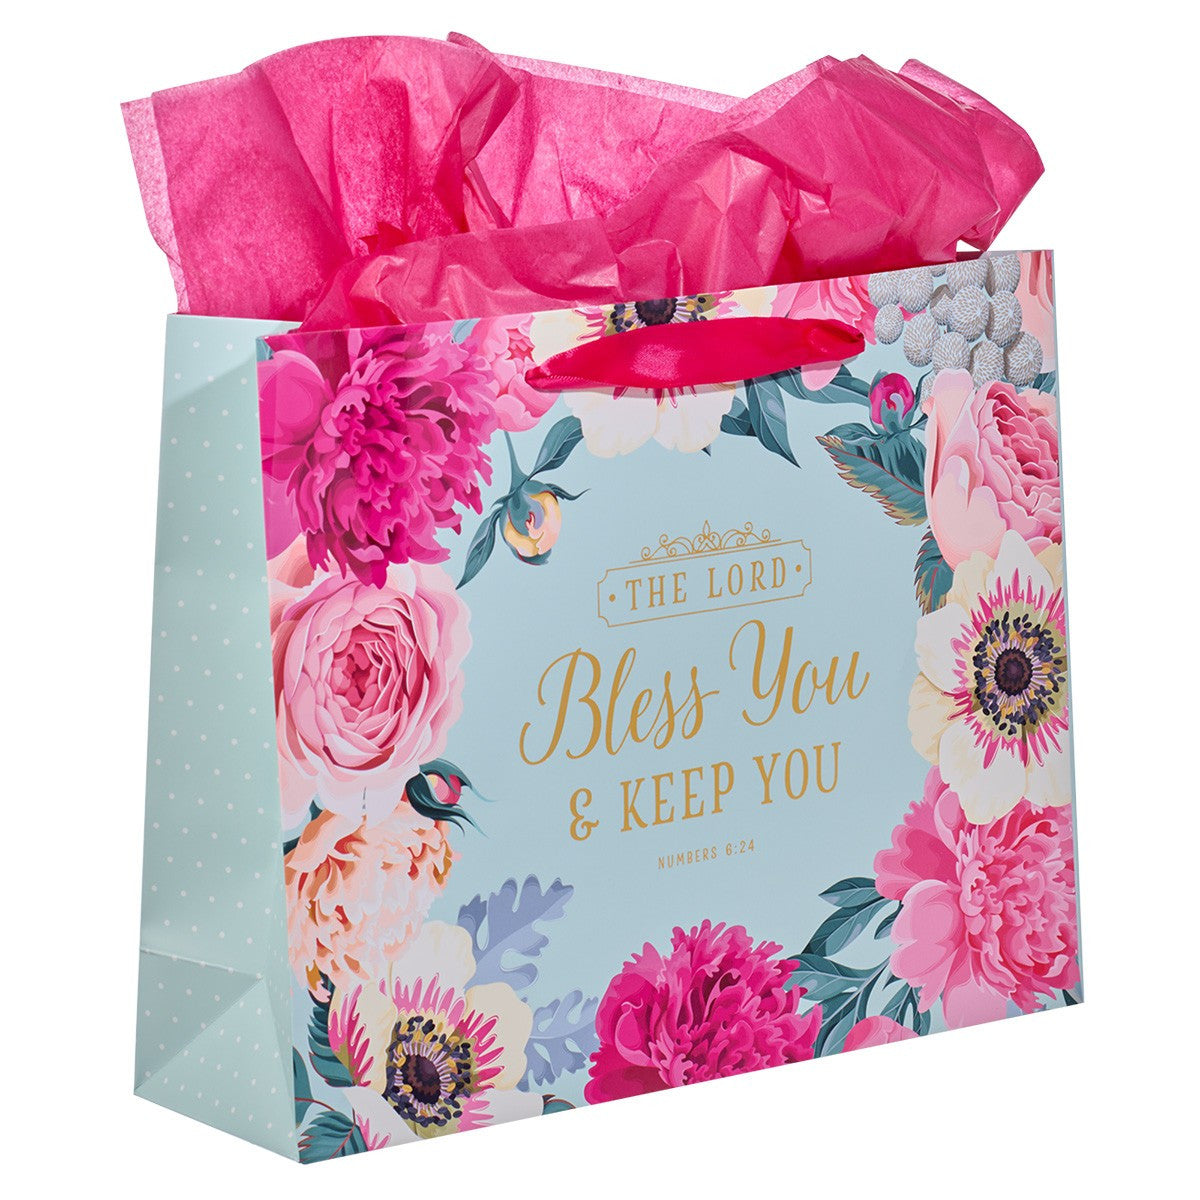 Bless You & Keep You Pink Floral Large Landscape Gift Bag with Card - Numbers 6:24 - The Christian Gift Company